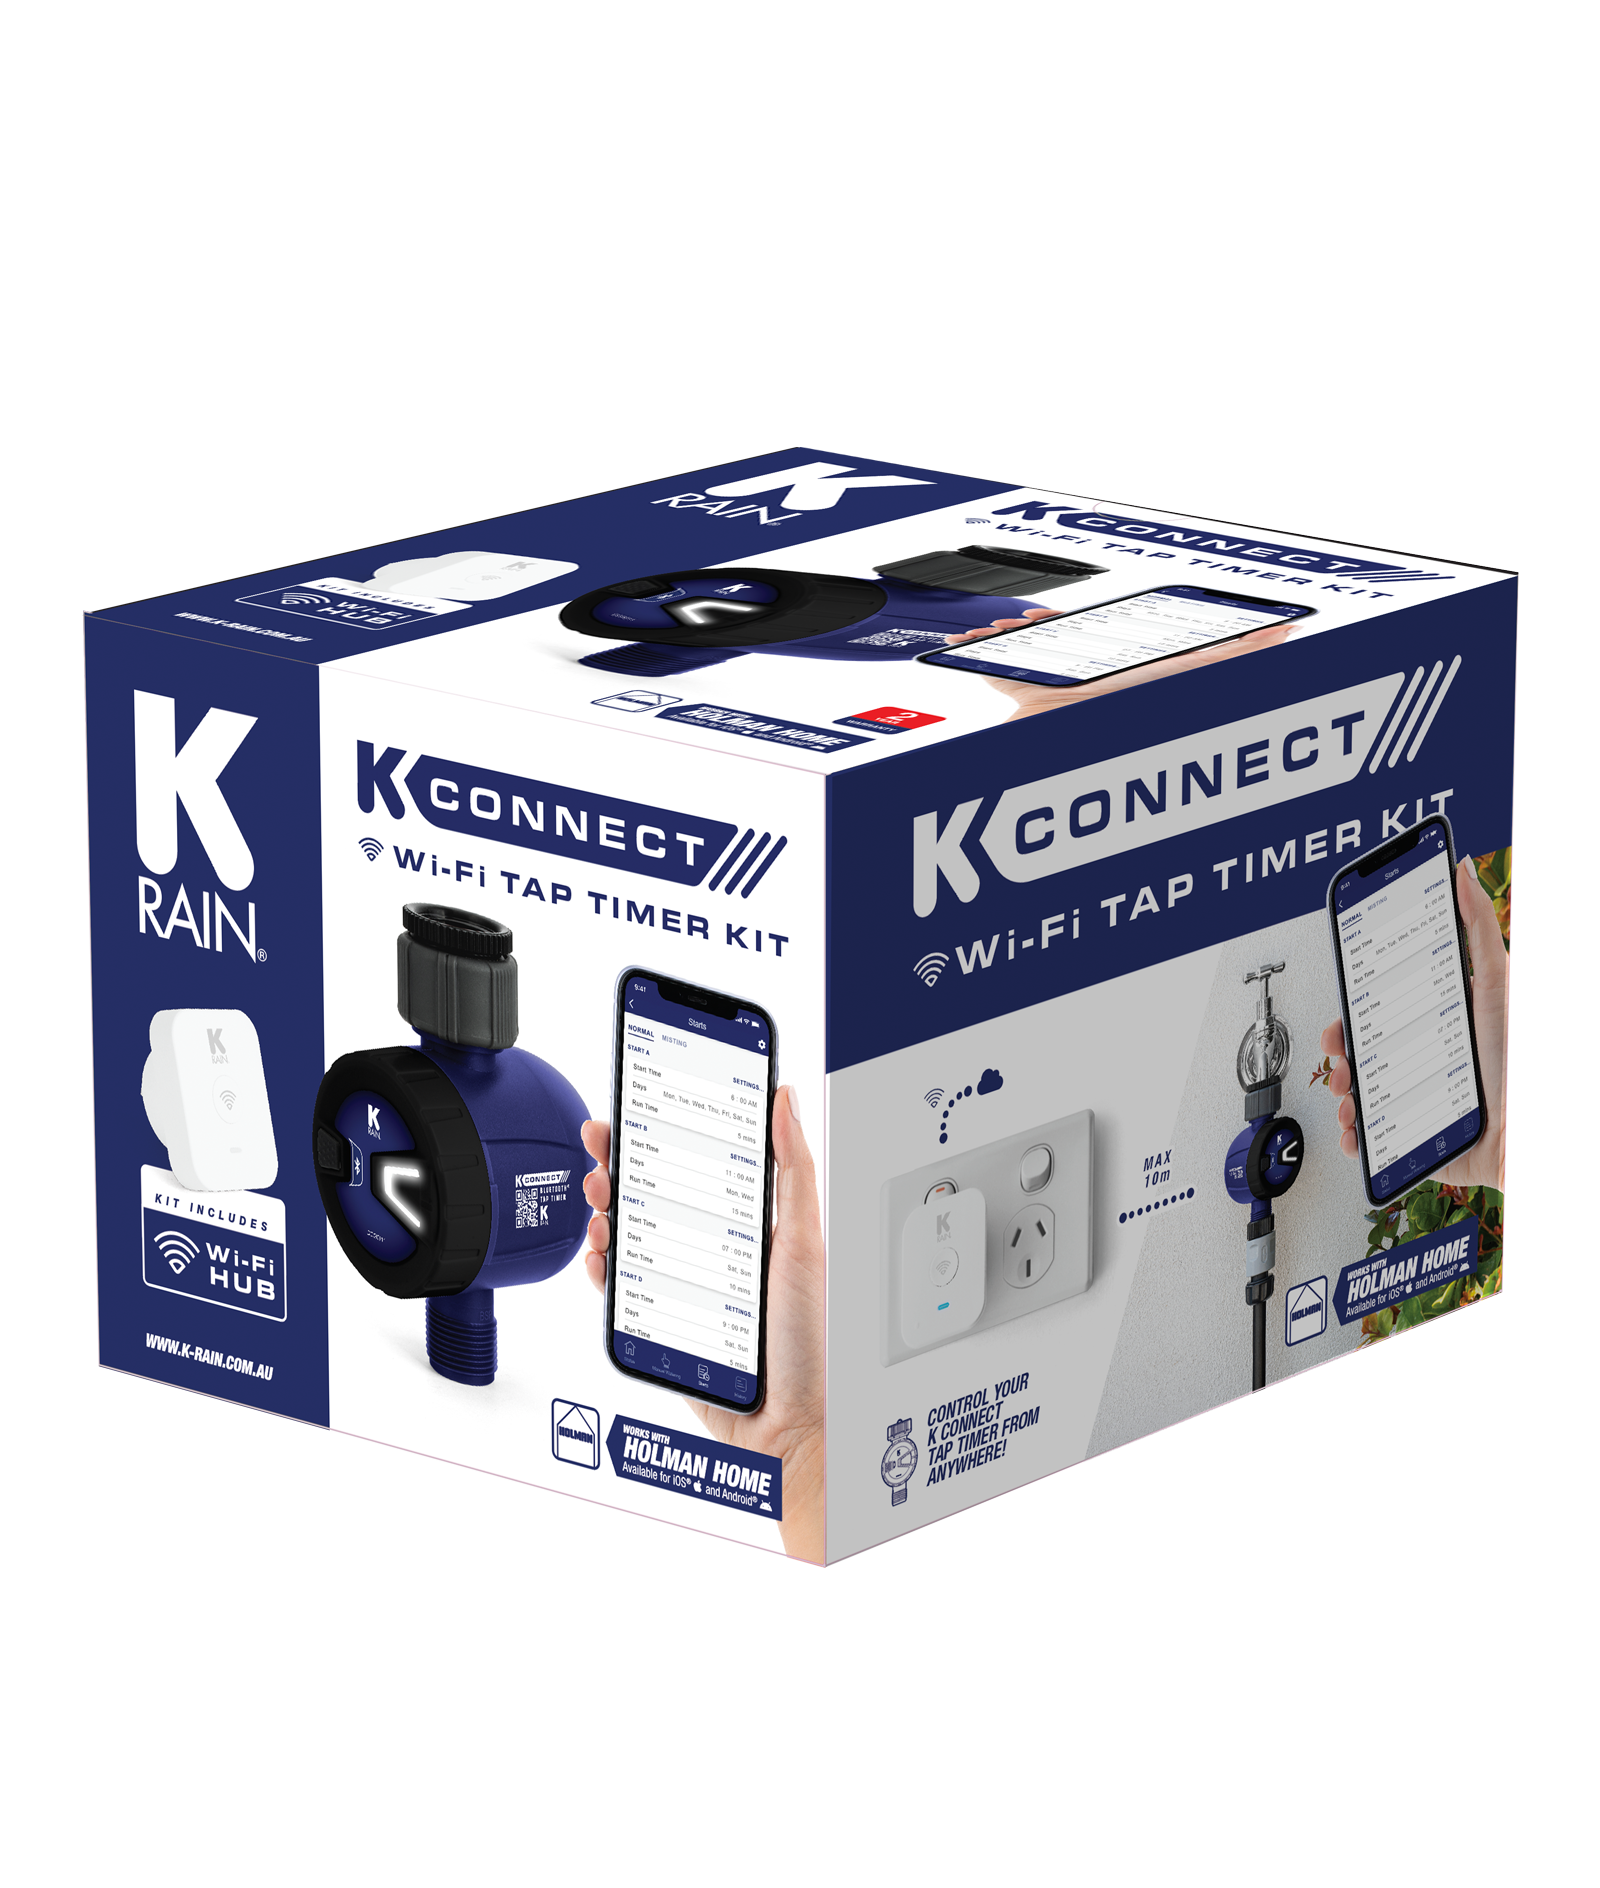 K Connect Wi-Fi Tap Timer Kit Packaging